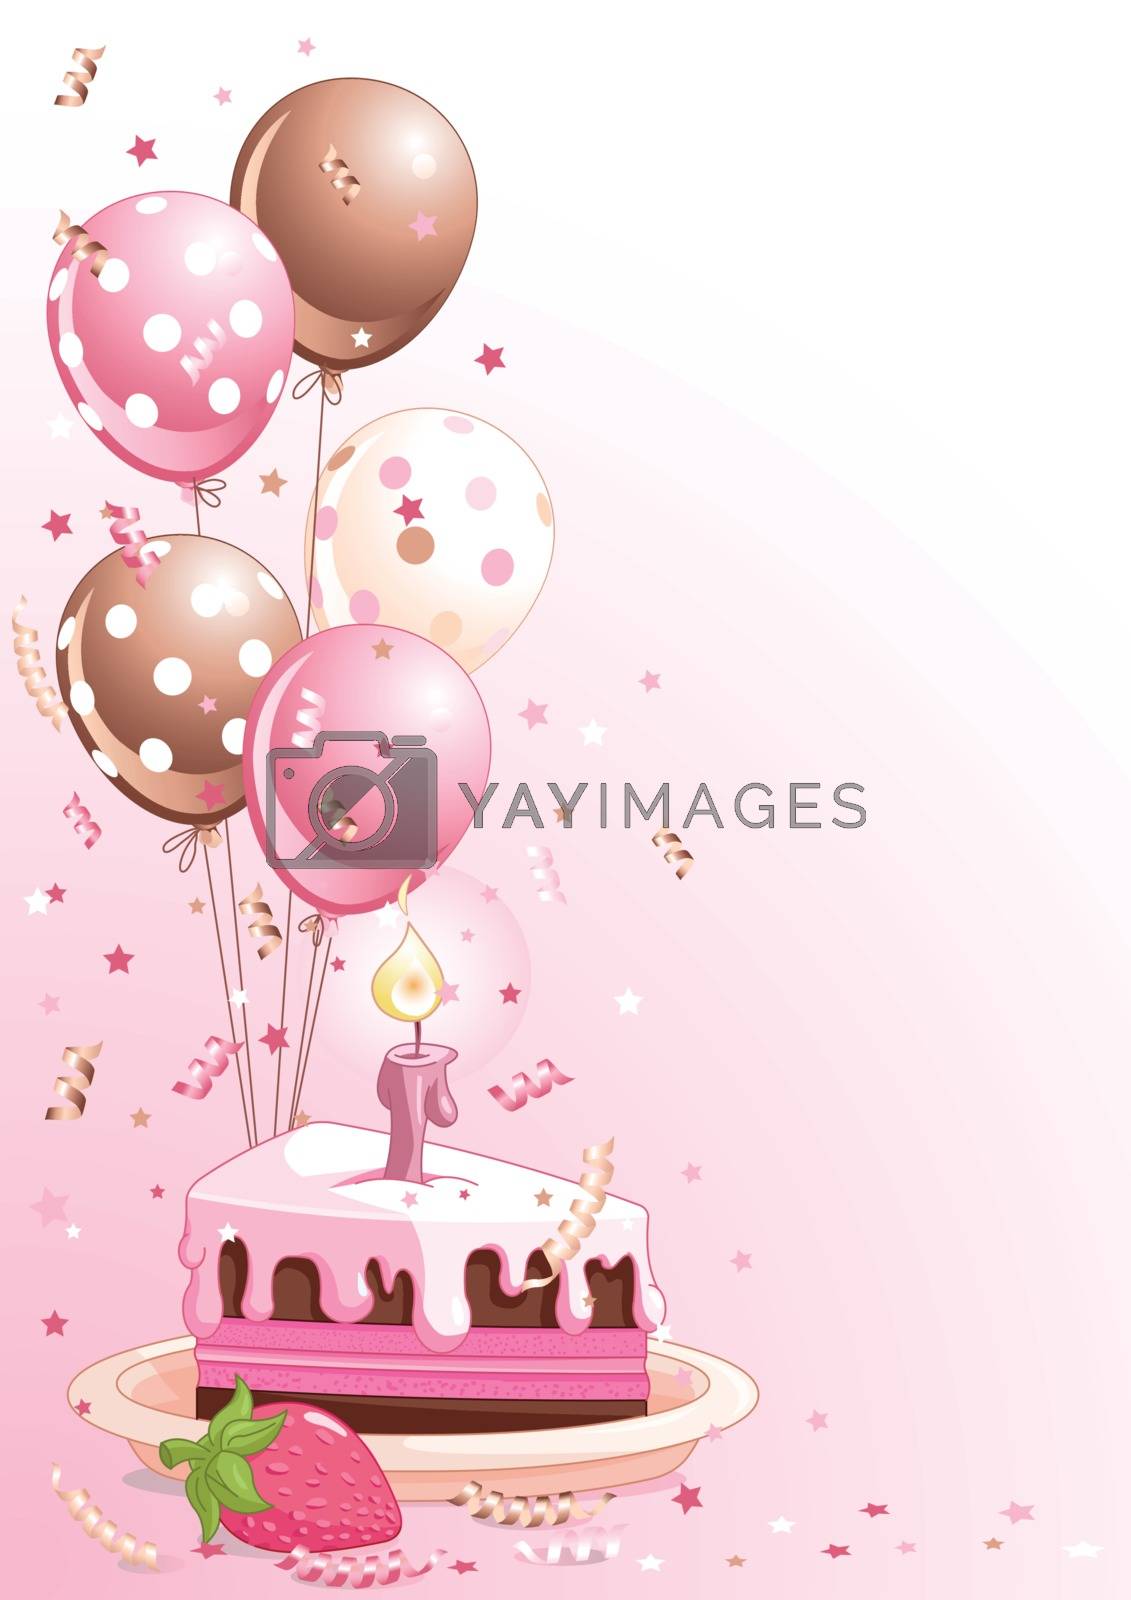 Royalty free image of Slice of Birthday Cake with Balloons by Dazdraperma